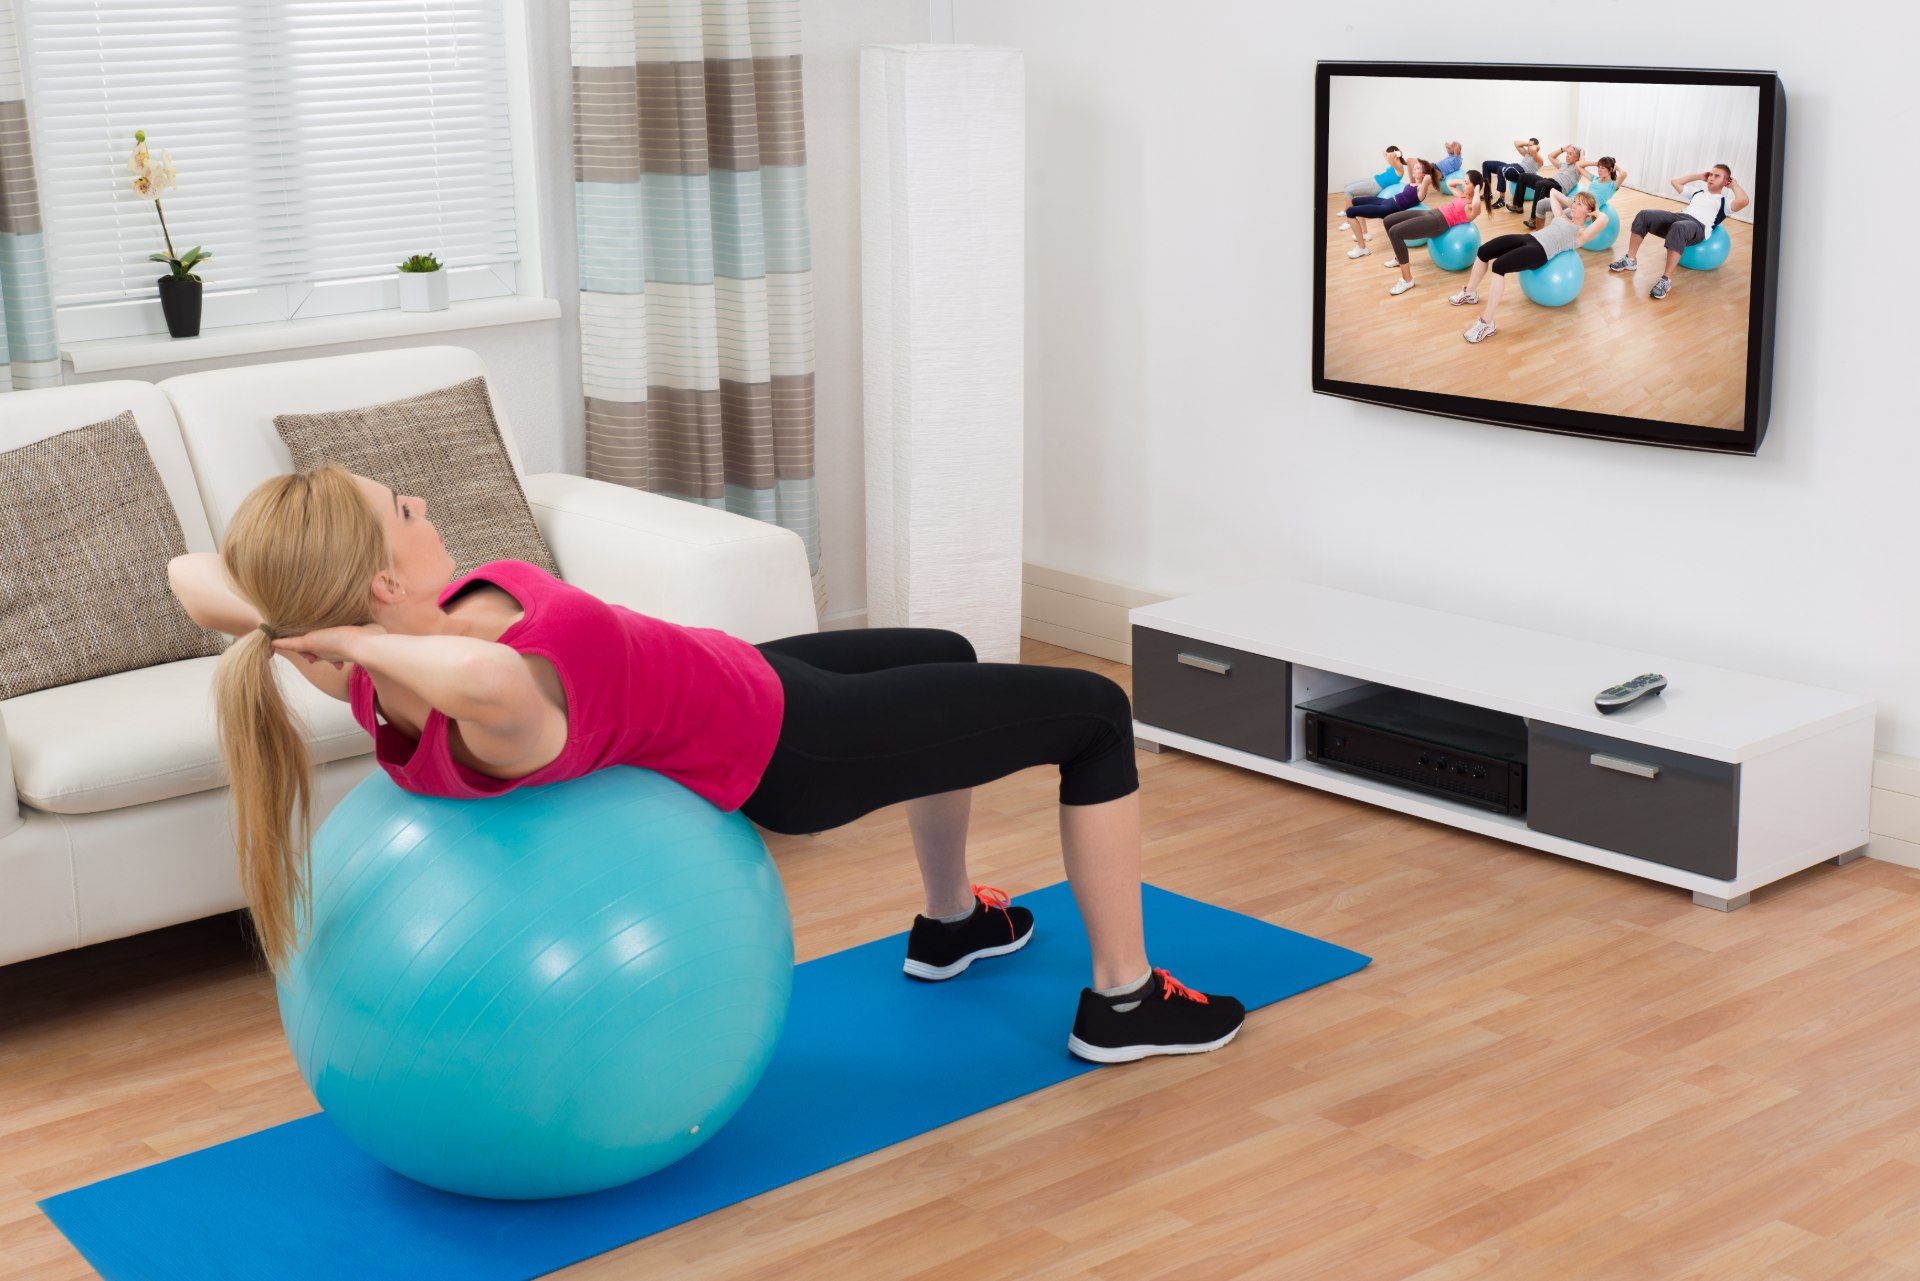 A woman uses an exercise ball on a blue yoga mat while following along with a workout video - Beachbody workout videos